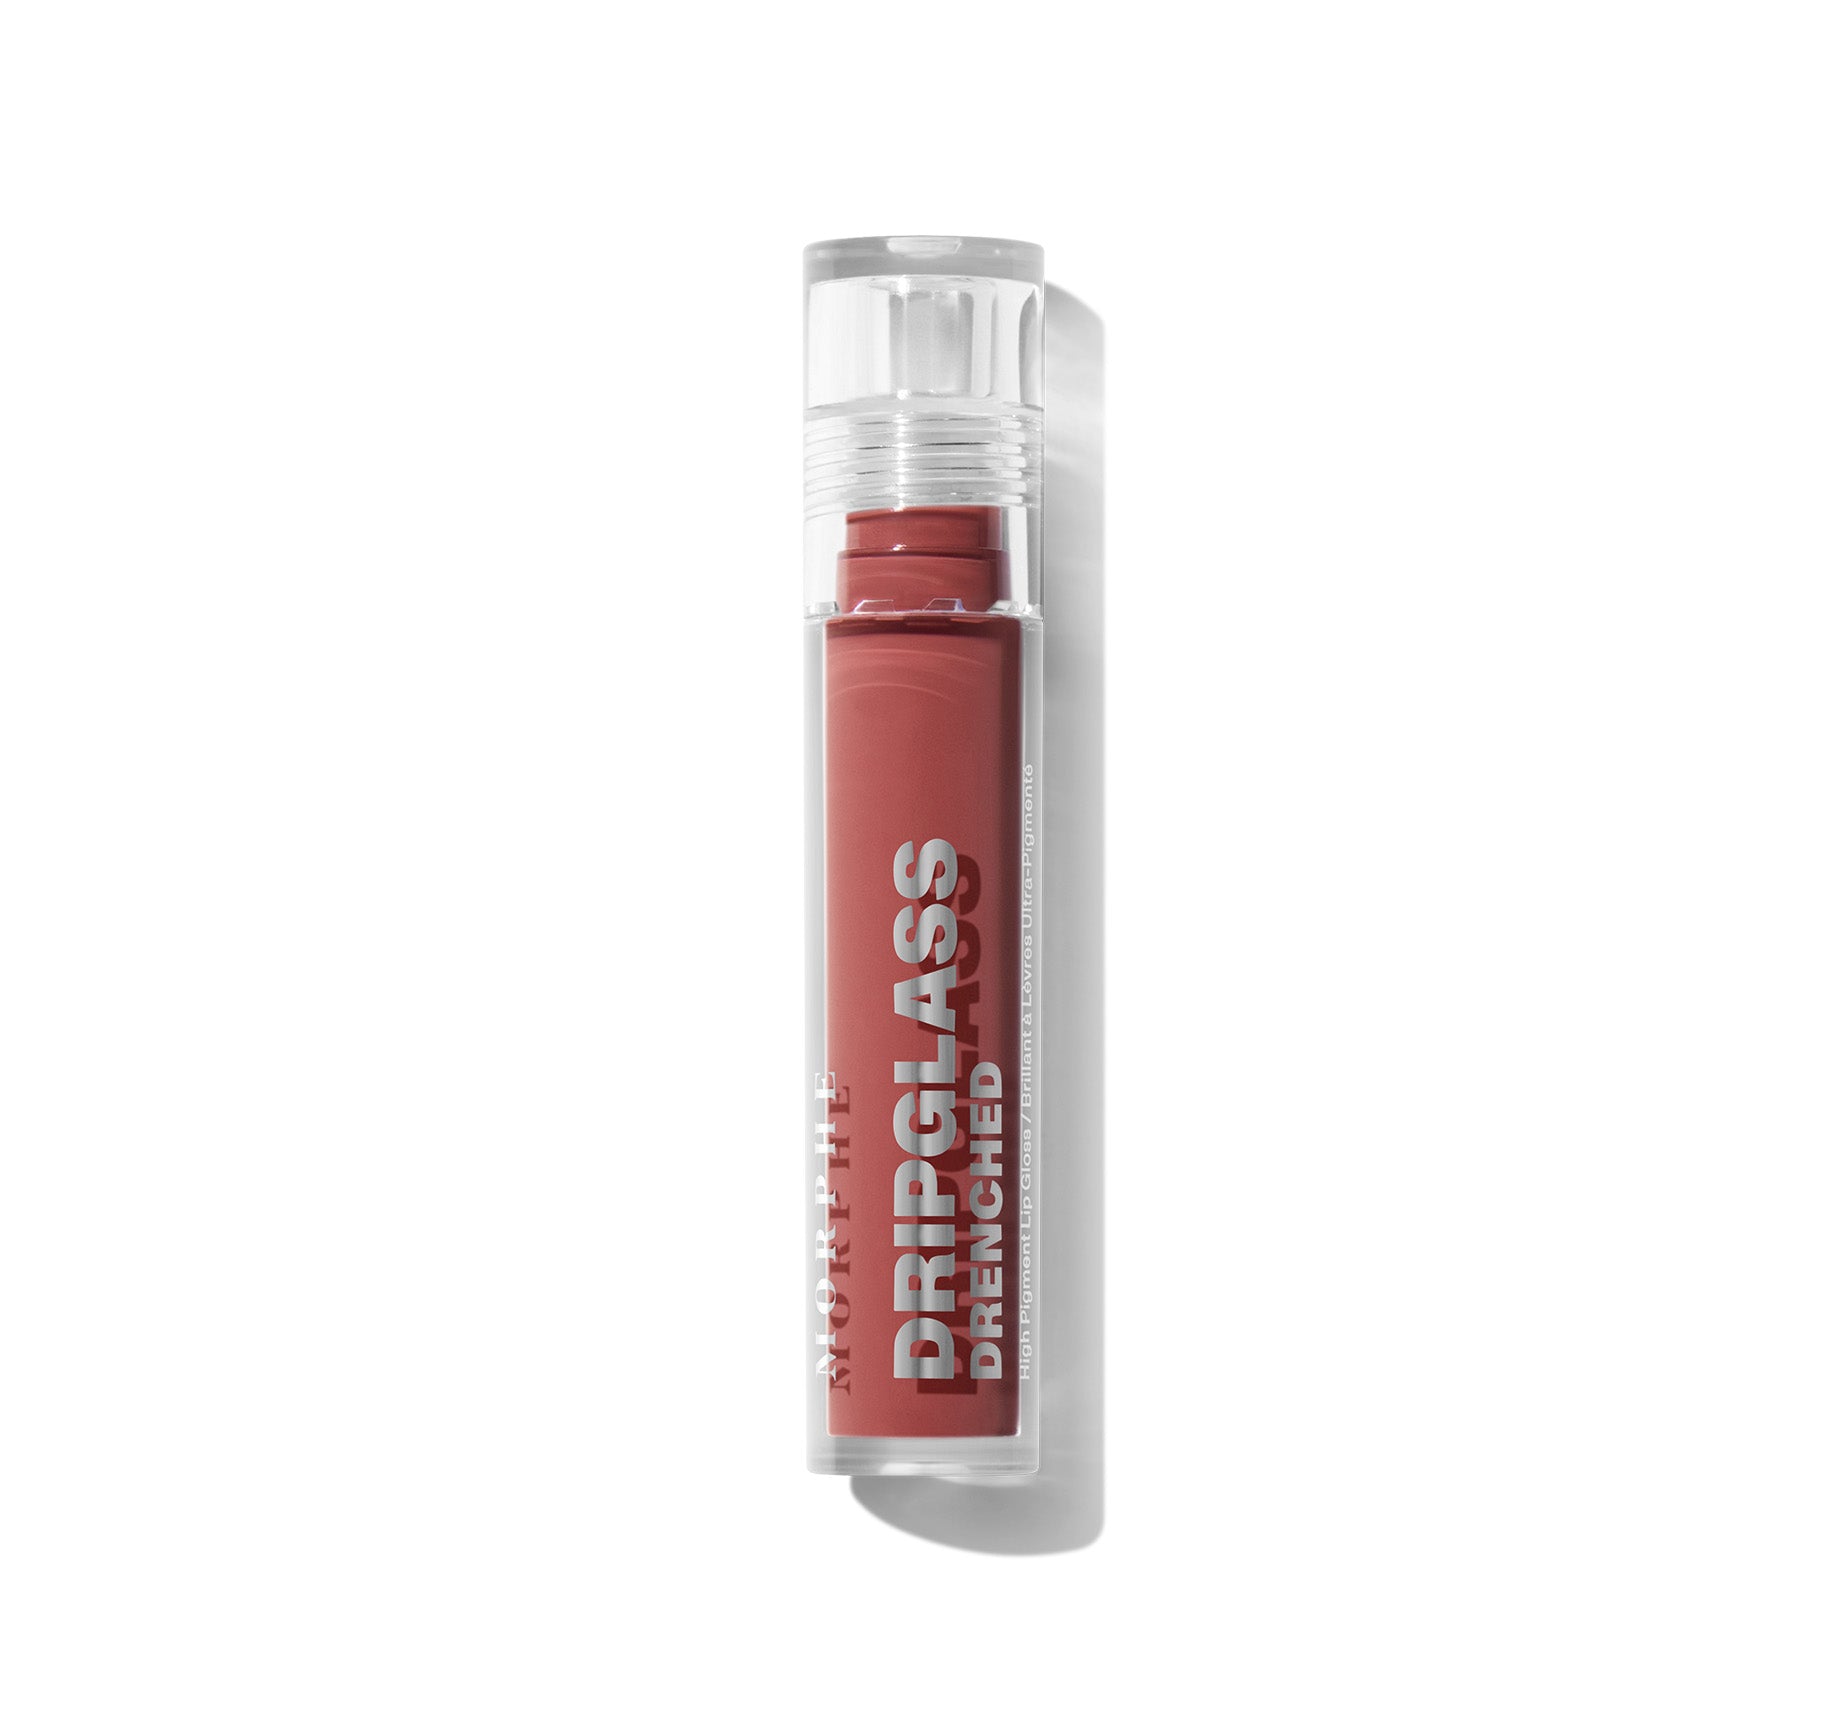 Dripglass Drenched High Pigment Lip Gloss - Deep Brick - Image 10